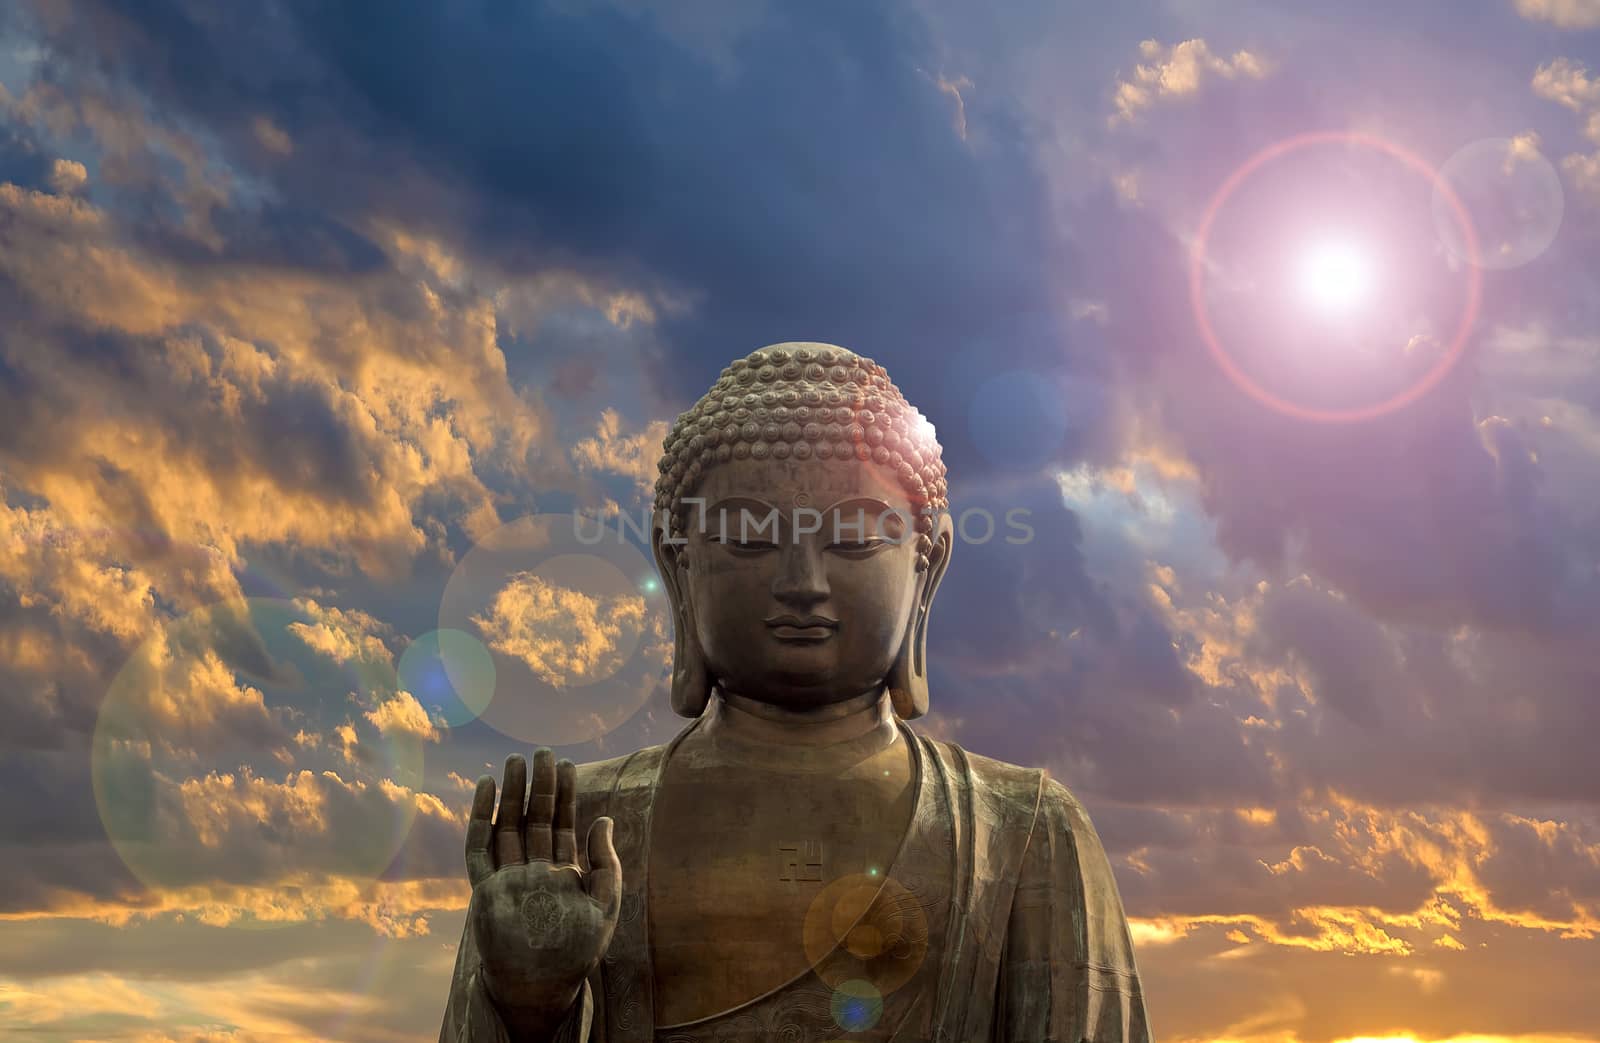 Tian Tan World Largest Sitting Bronze Buddha at Ngong Ping Village in Hong Kong with Clouds and Sun Flare Background